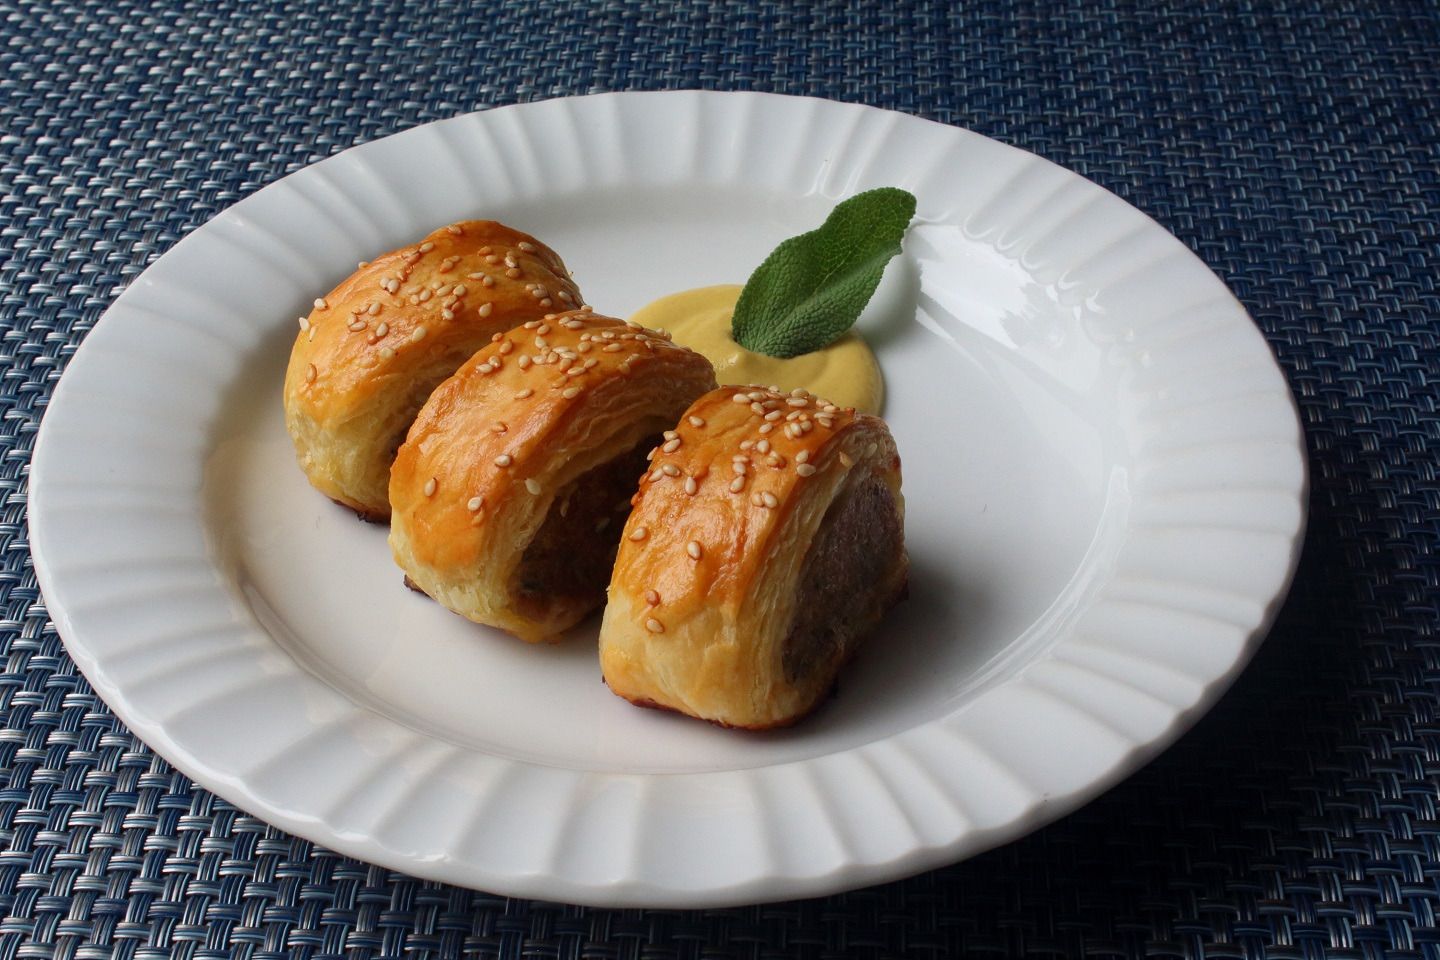 <p>Sausage rolls are so simple thanks to their few, store-bought ingredients, but they're oh-so-tasty. Plus, they make great appetizers alongside your favorite dipping sauce (Chef John likes to use mustard).</p>
                          